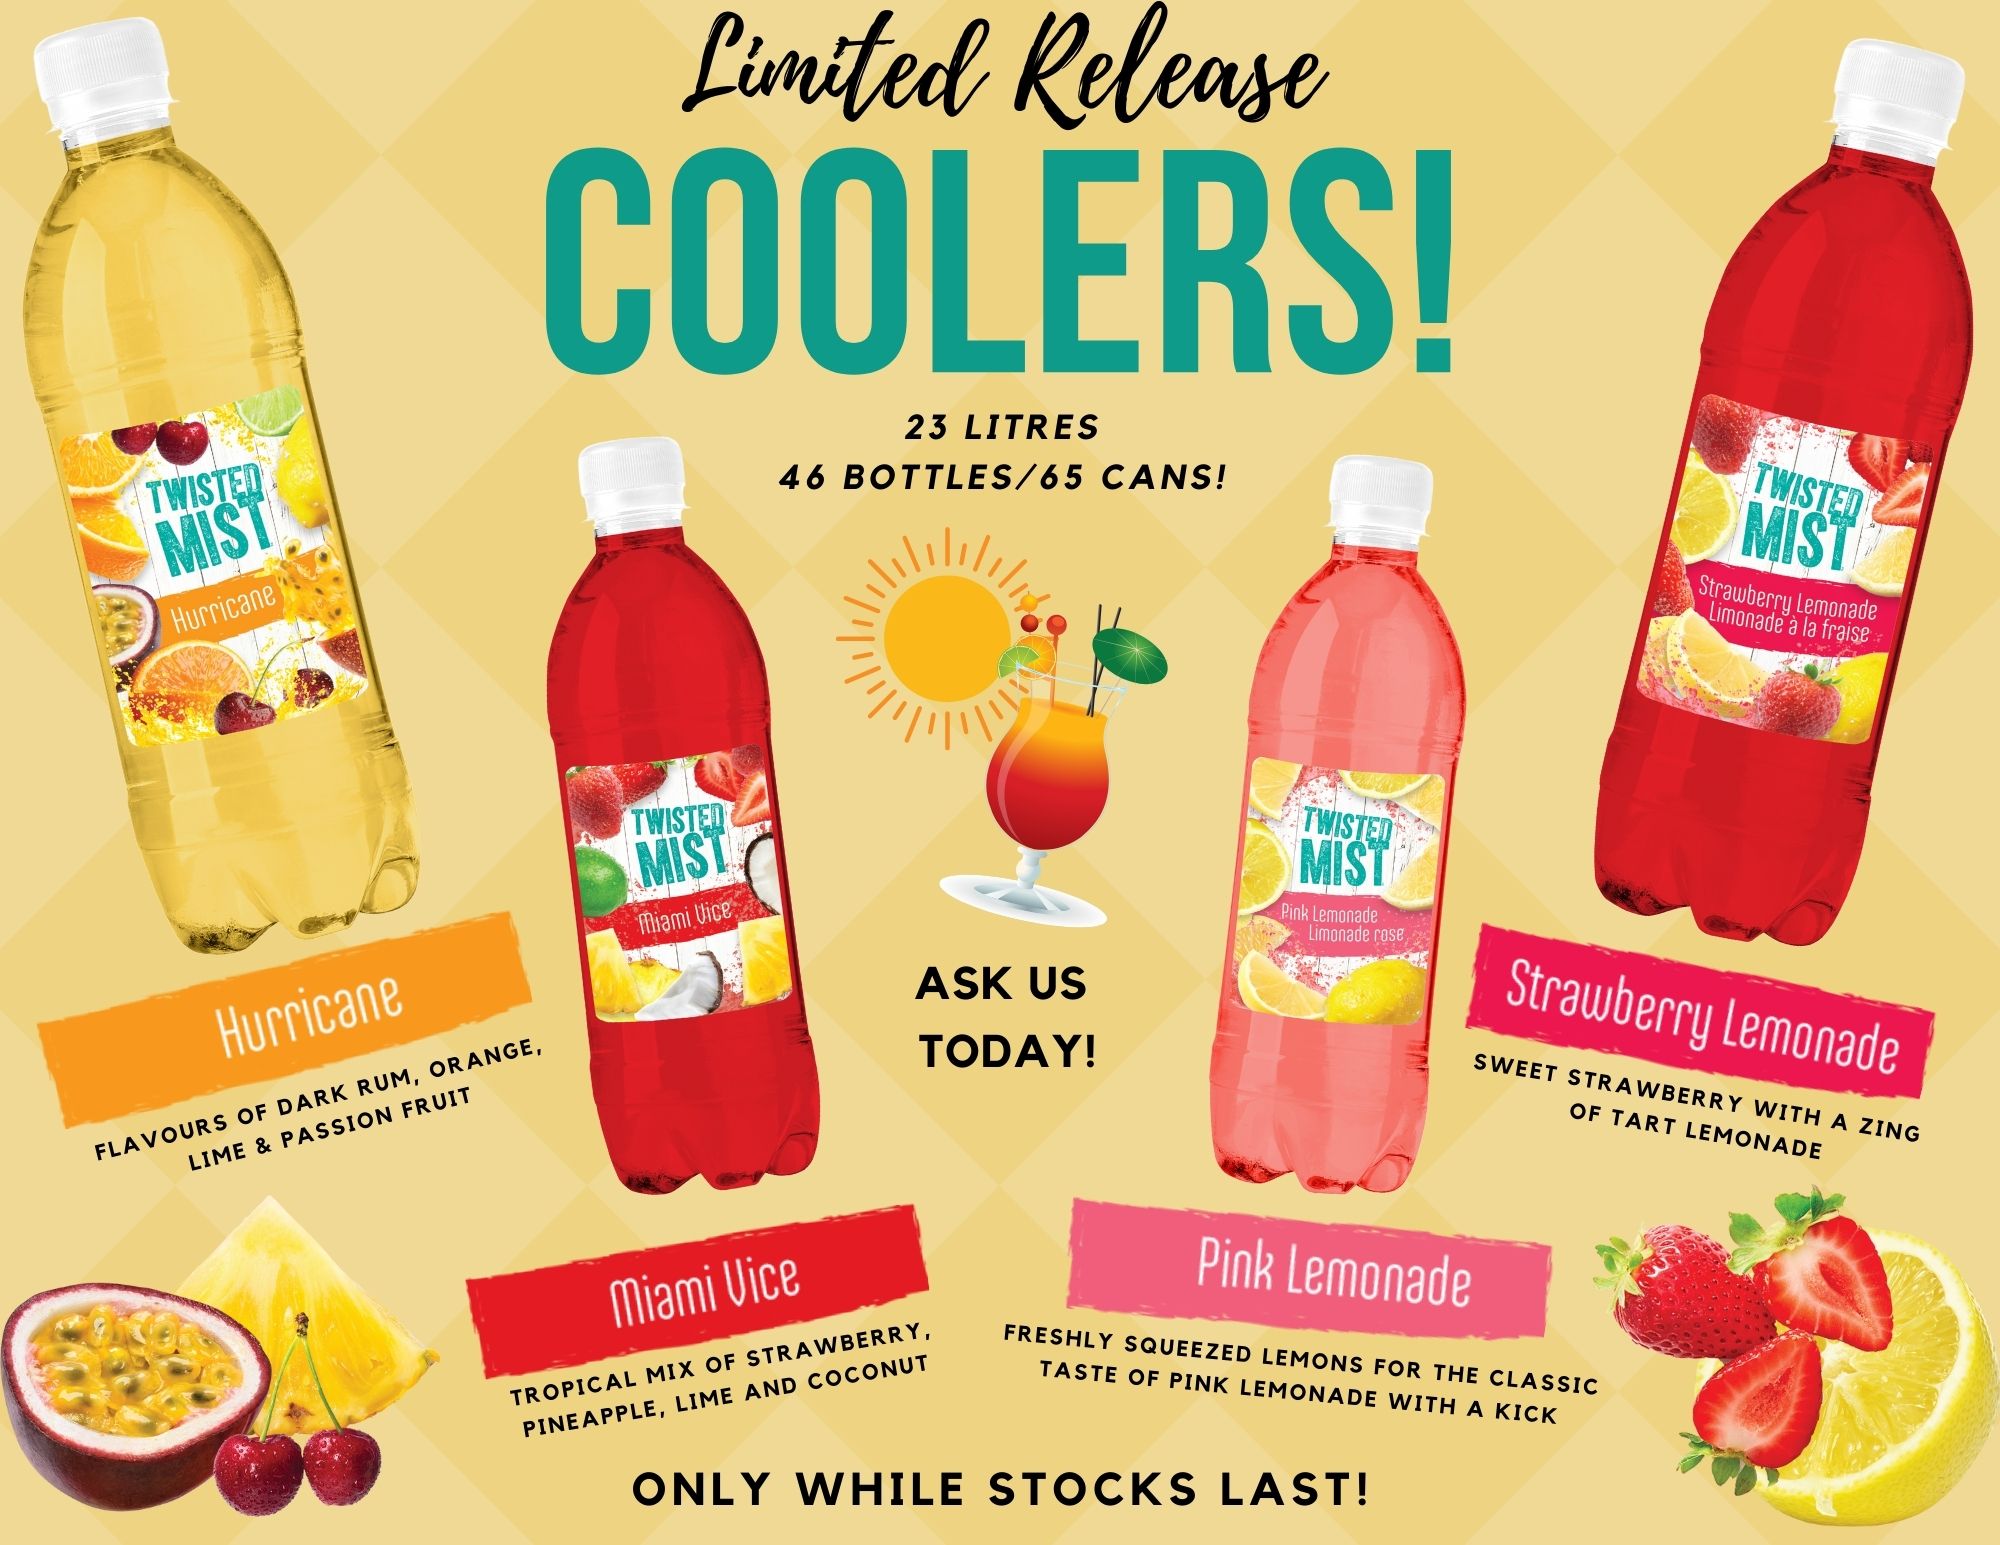 Limited Release Coolers